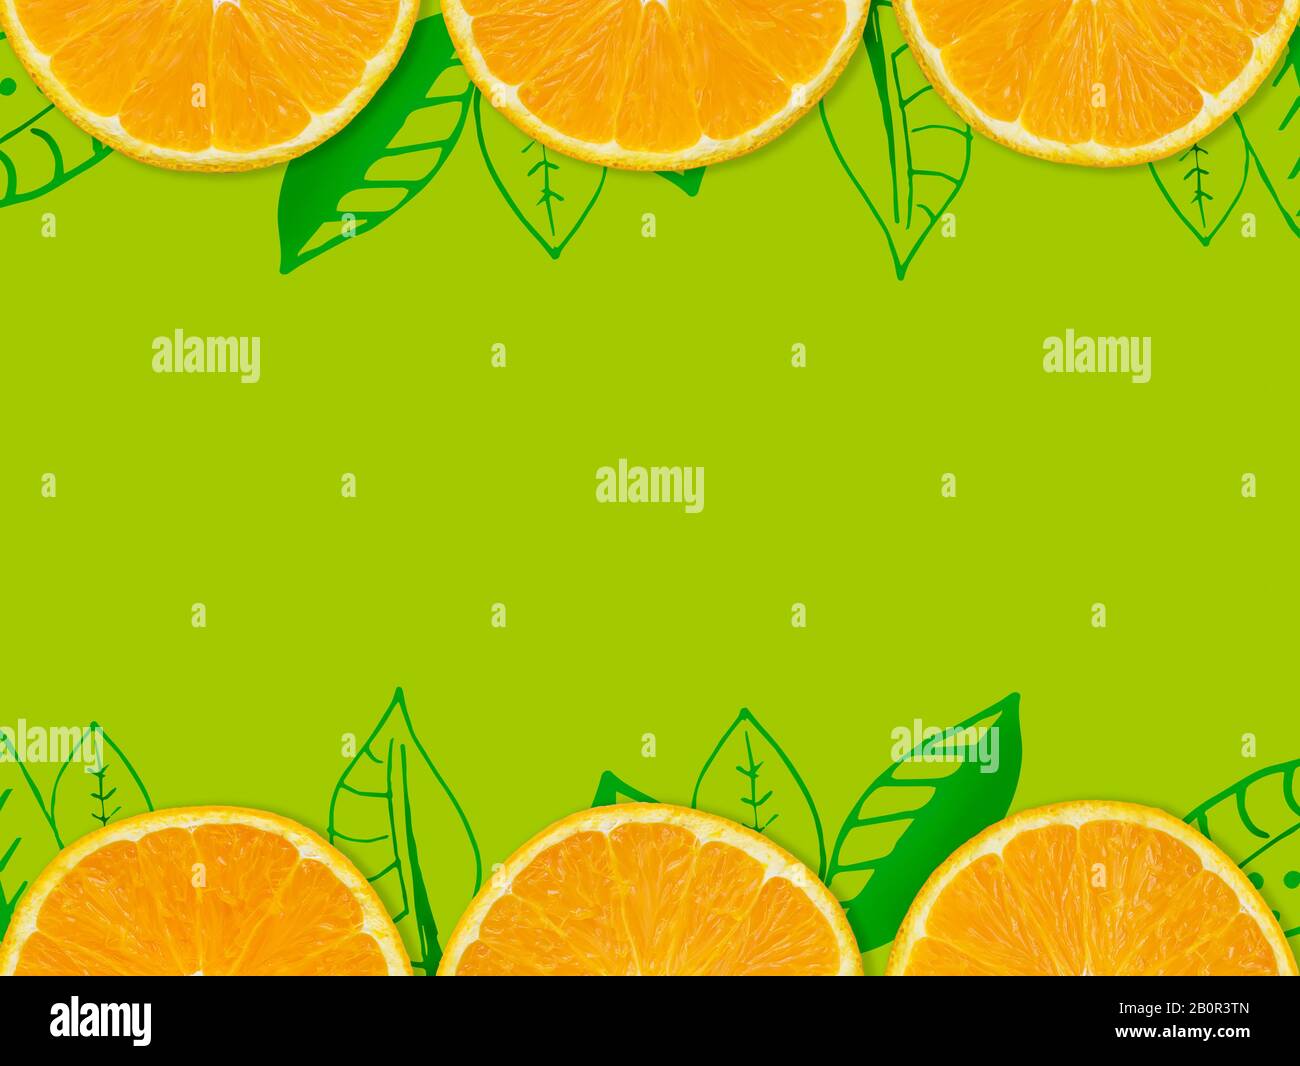 abstract orange background. fresh orange slide isolated on green background decorate with green leaves line for food and beverage background Stock Photo